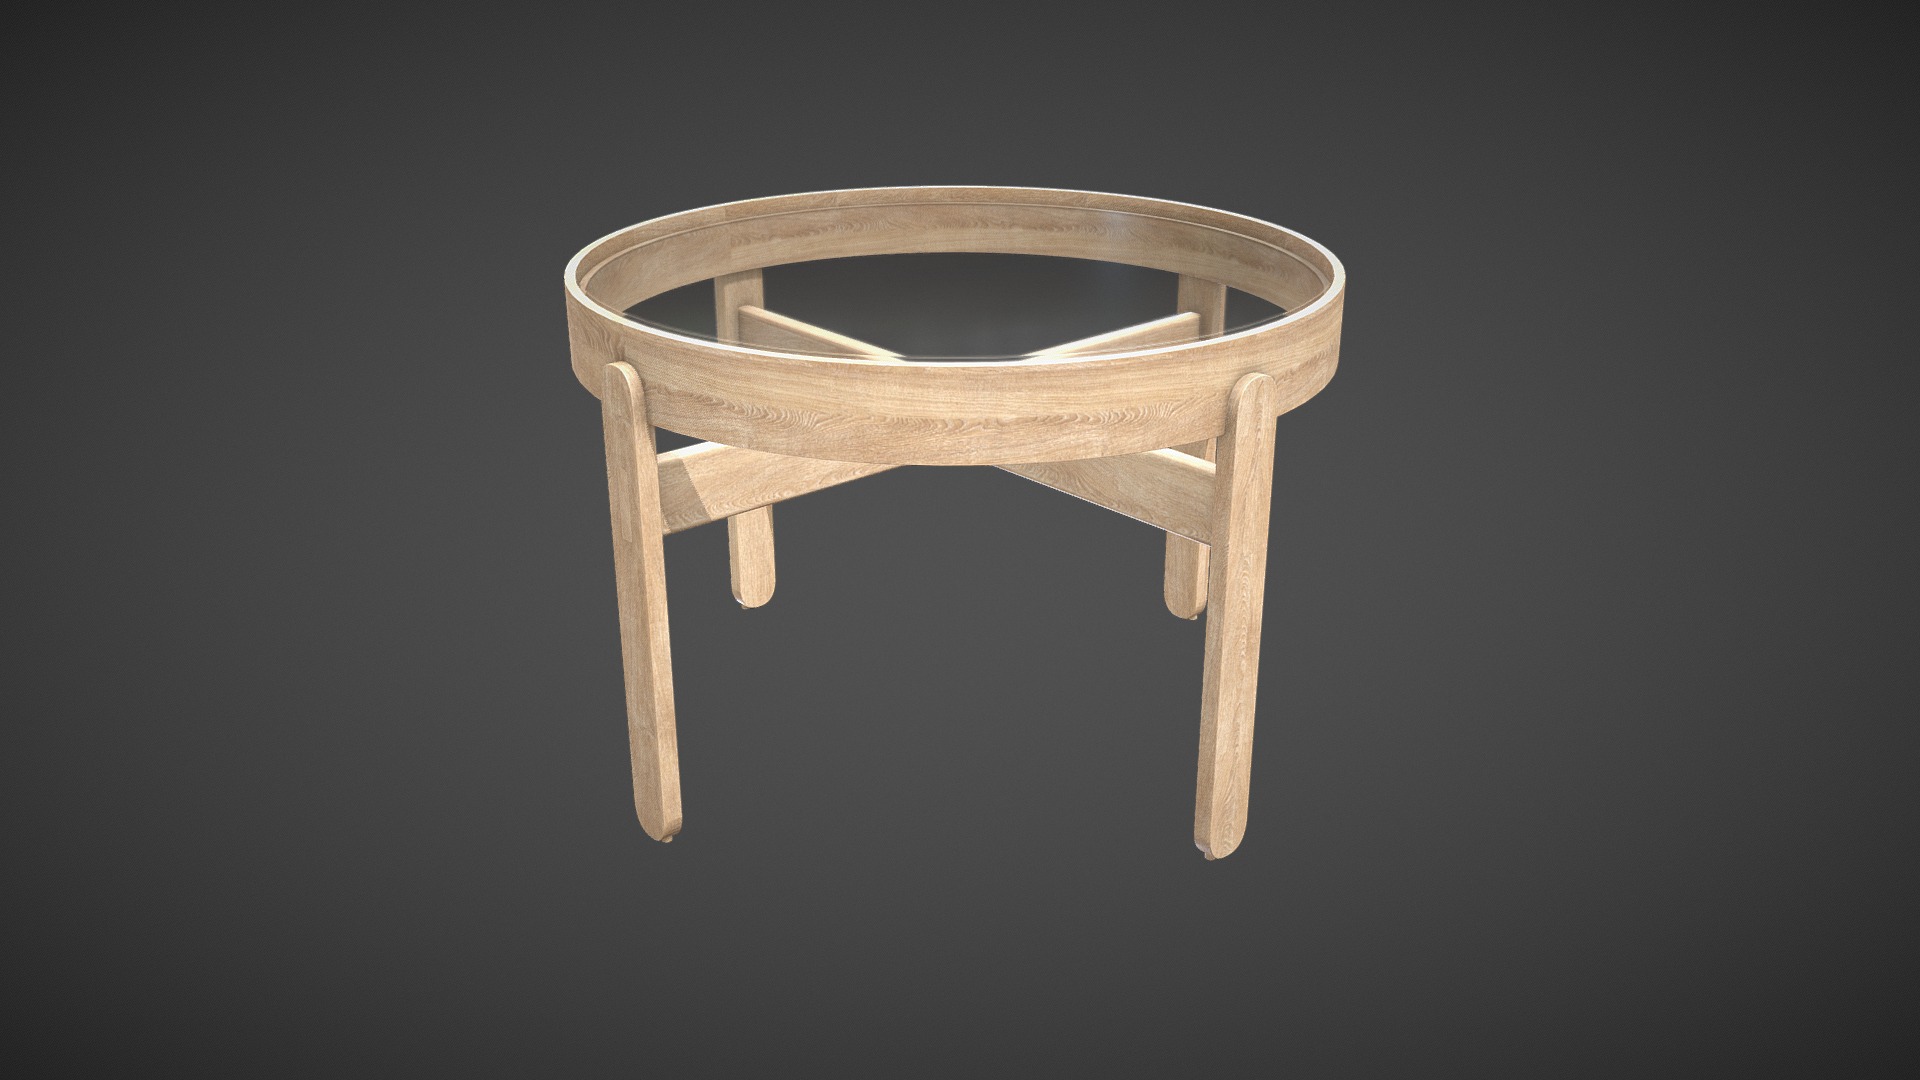 3D model Sidetable Mirzam H39 D60 - This is a 3D model of the Sidetable Mirzam H39 D60. The 3D model is about a wooden chair with a cushion.